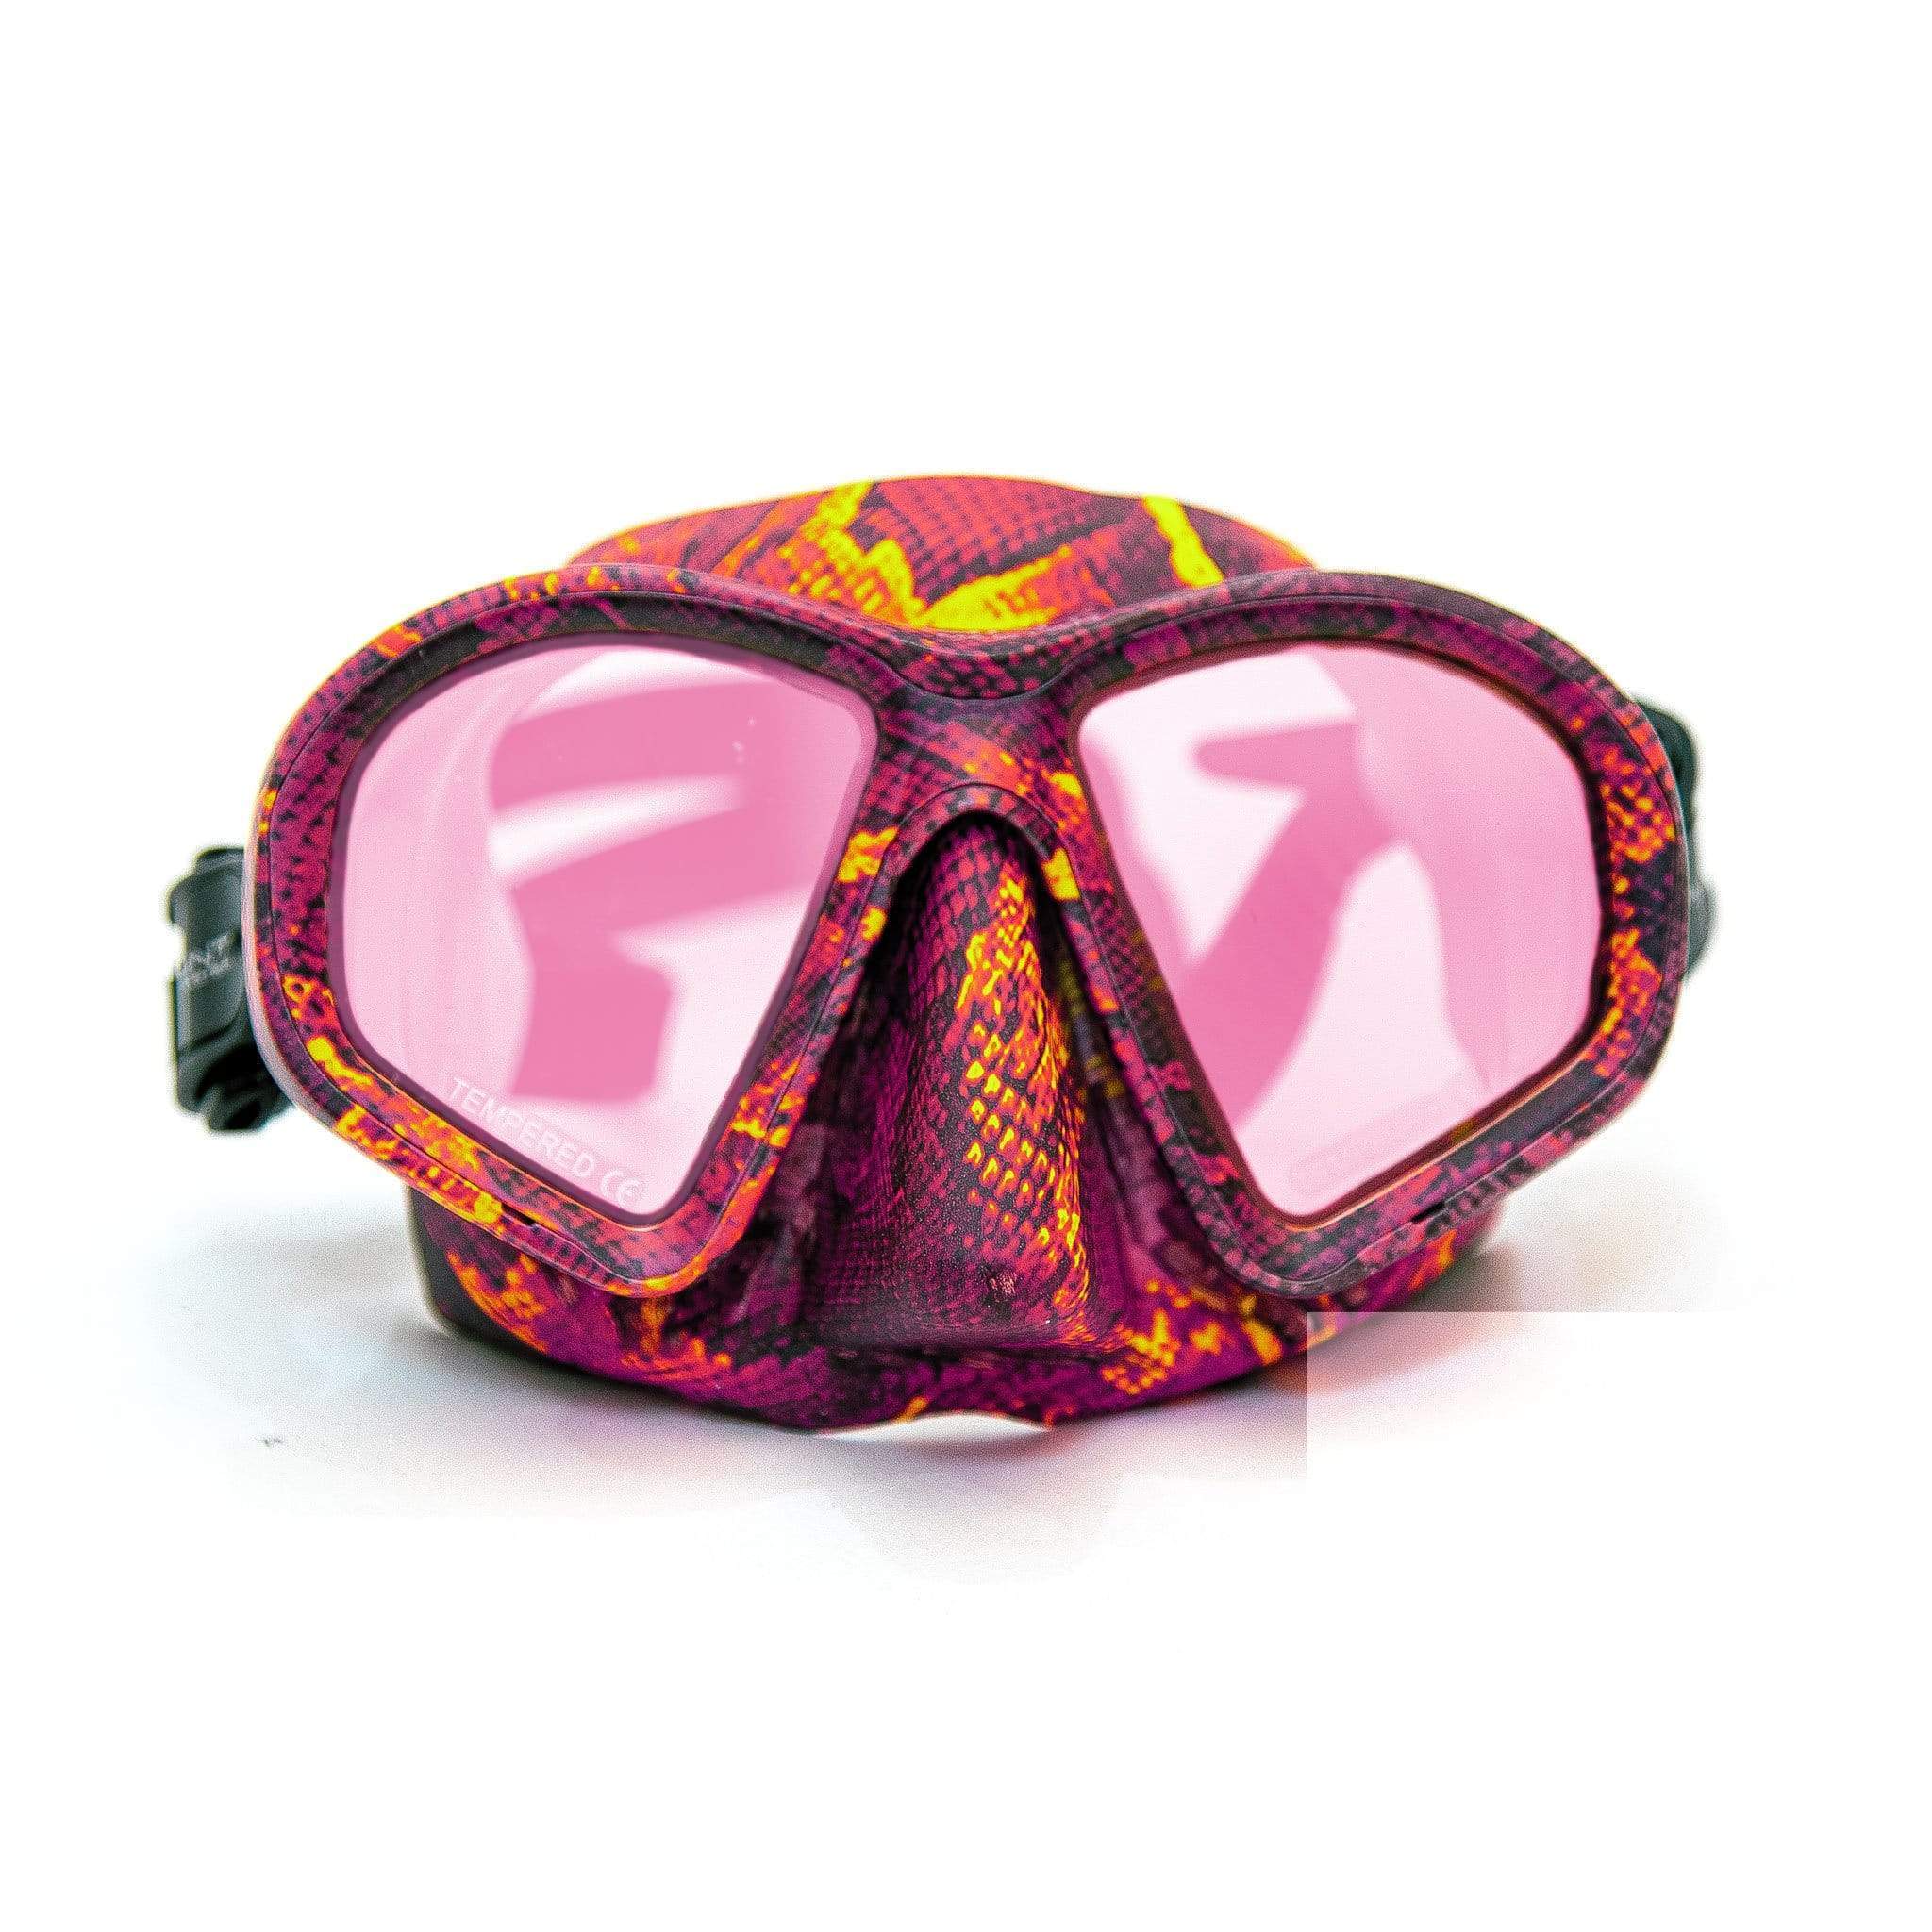 HuntMaster Pink Harbinger Camo Diving Mask (Huntress)- With Matching Camo Container (Pink)